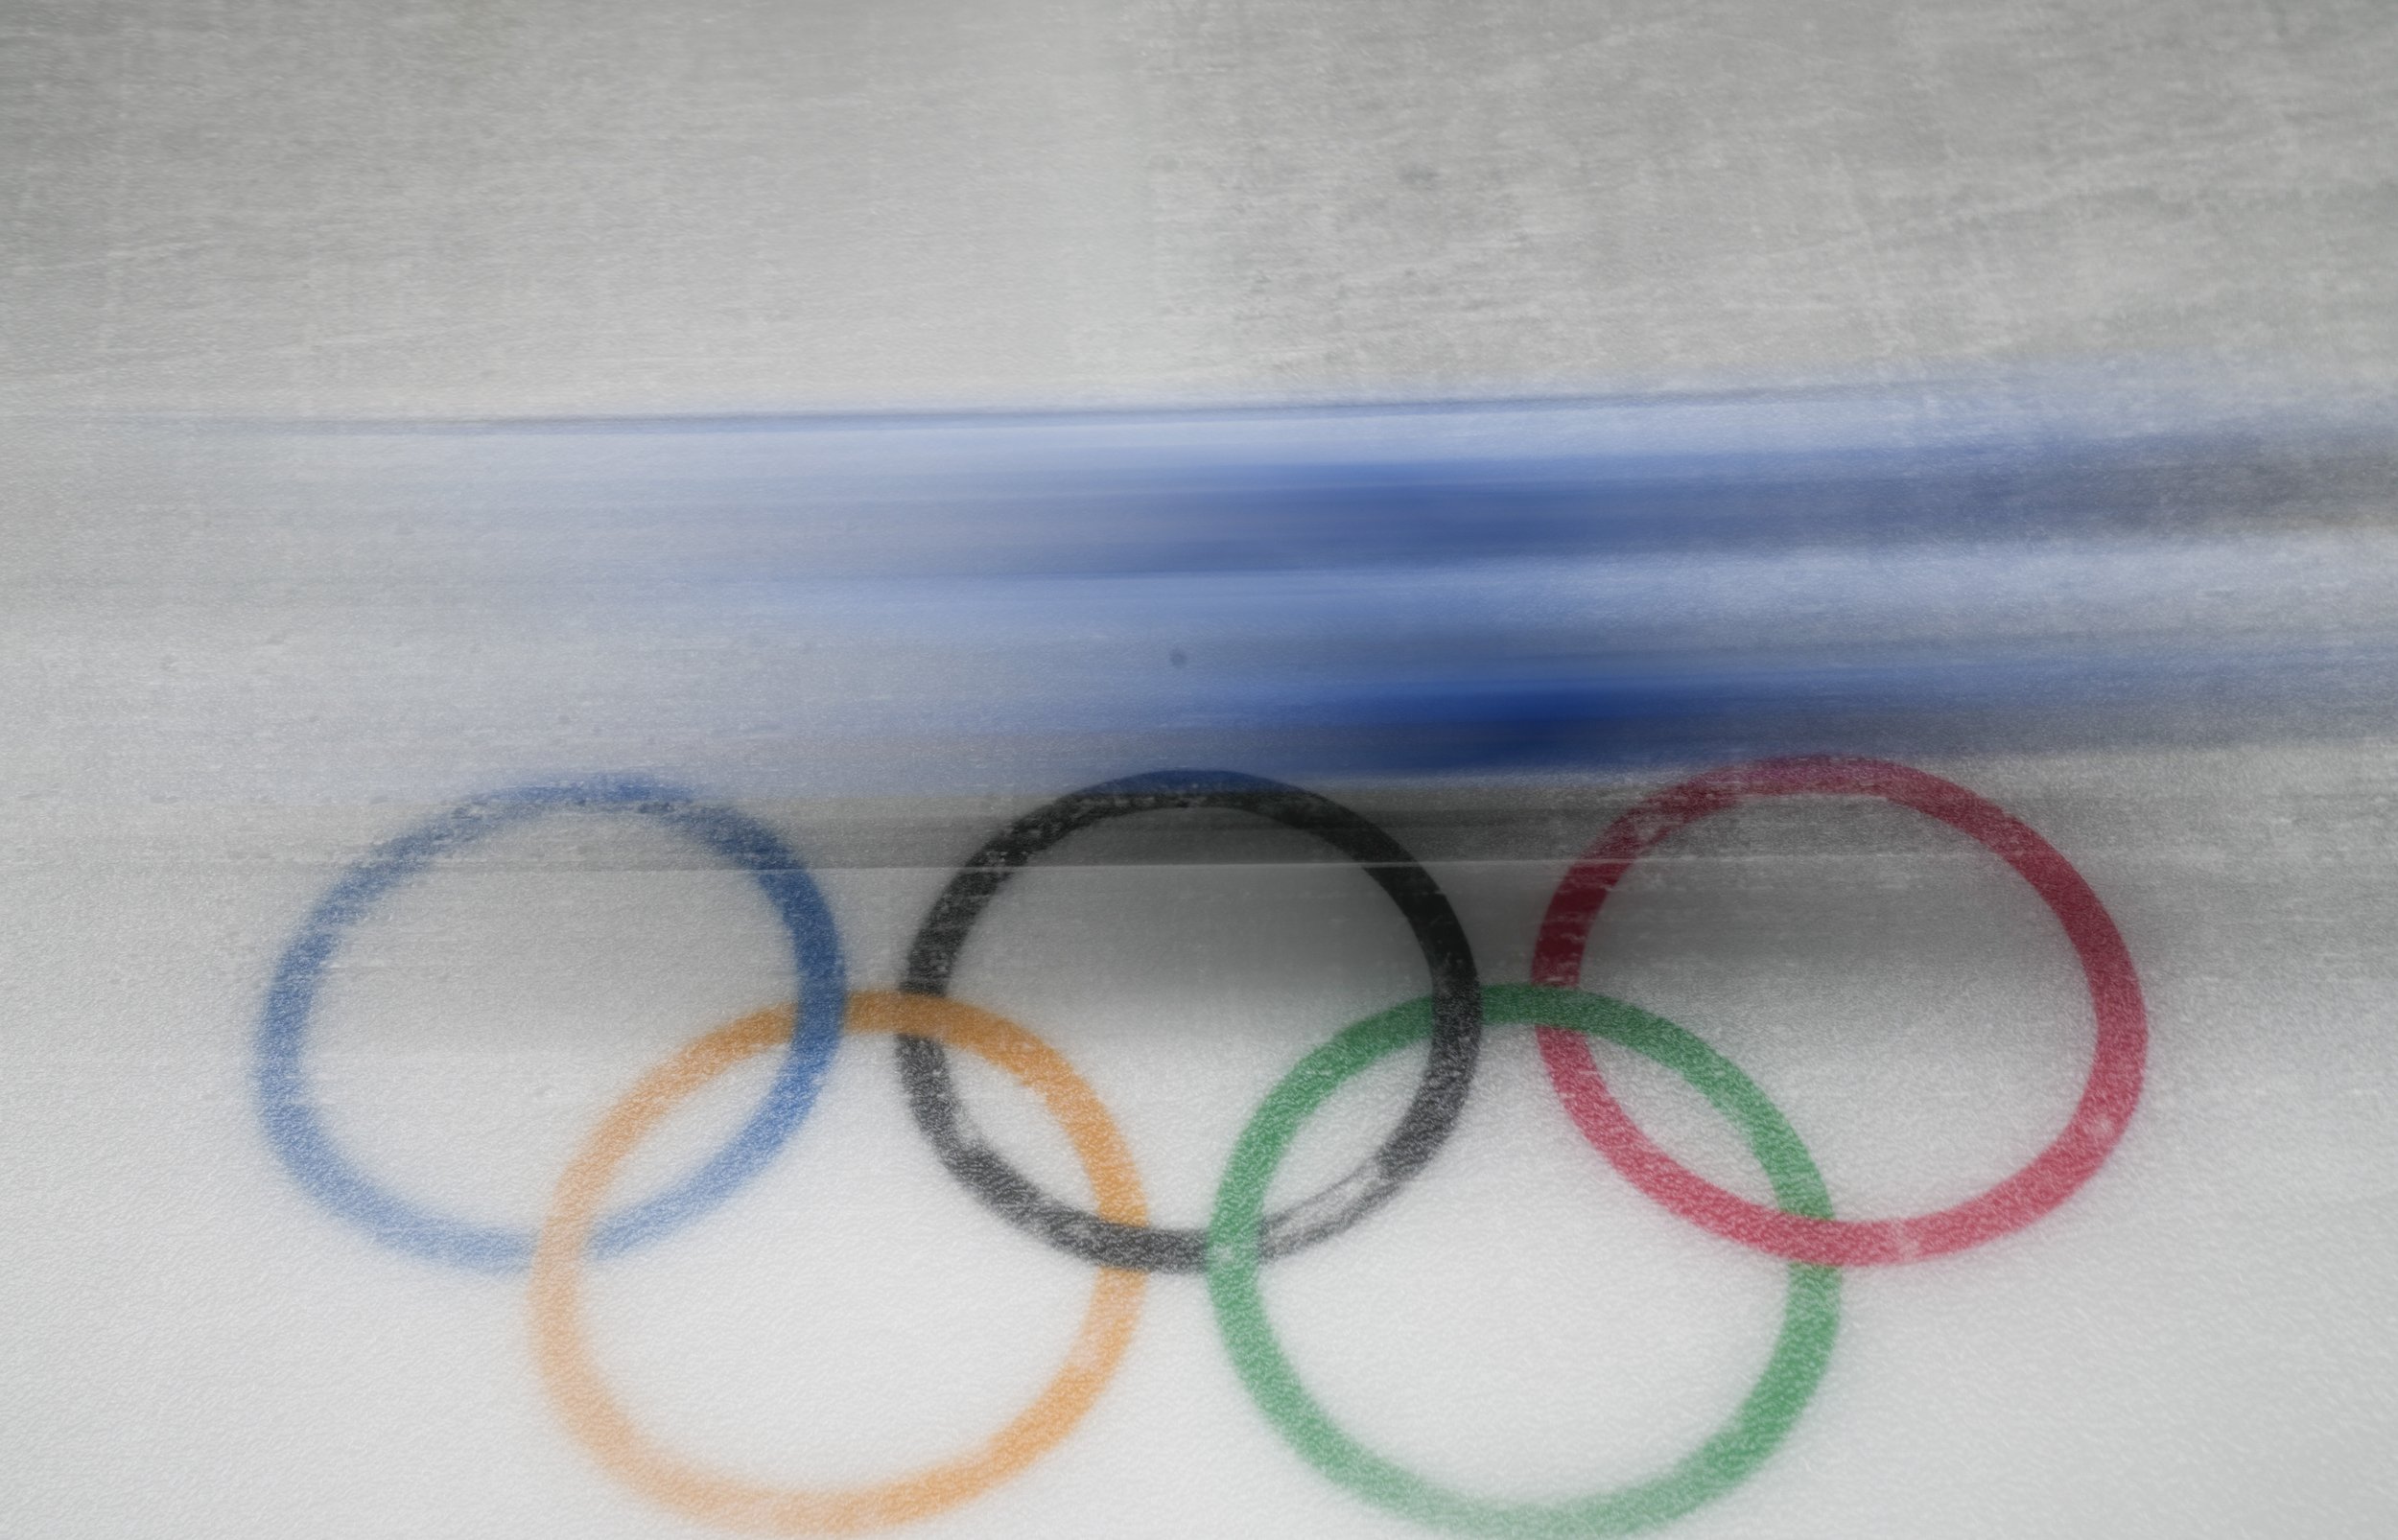  A competitor slides past the Olympic rings during the luge women's singles run 1 at the 2022 Winter Olympics, Monday, Feb. 7, 2022, in the Yanqing district of Beijing. (AP Photo/Pavel Golovkin) 